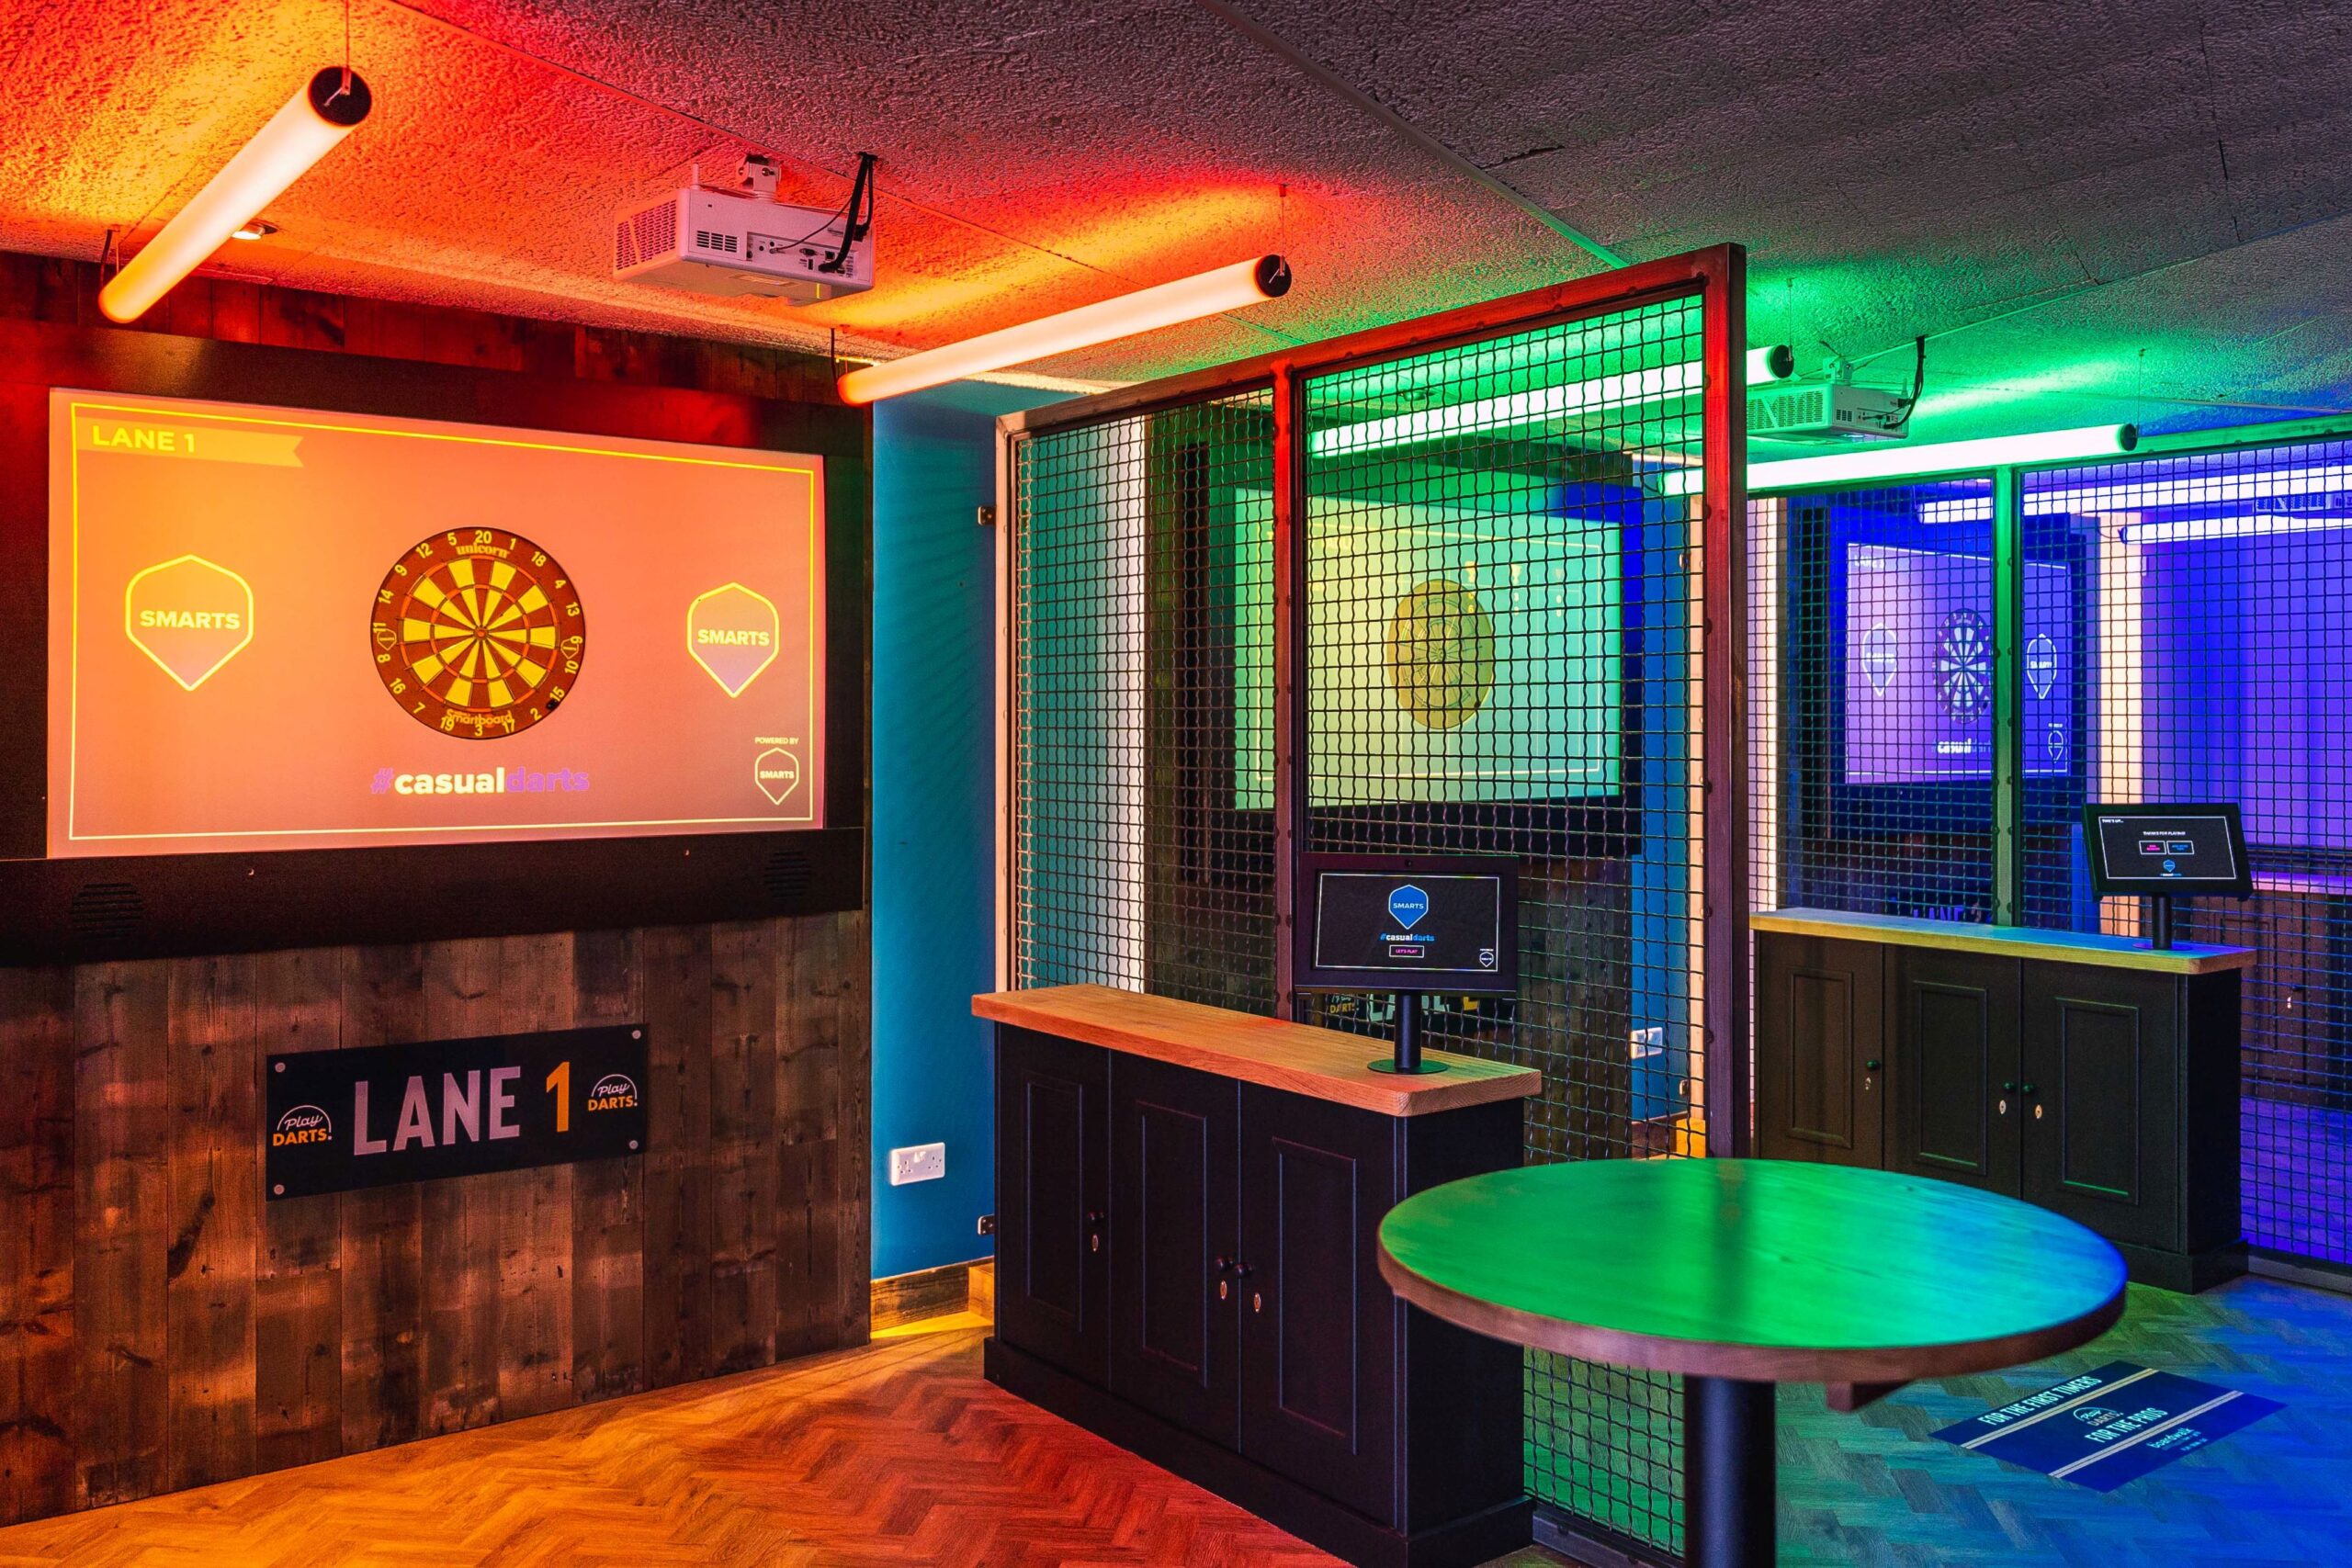 Boardwalk Bar relaunched after refit